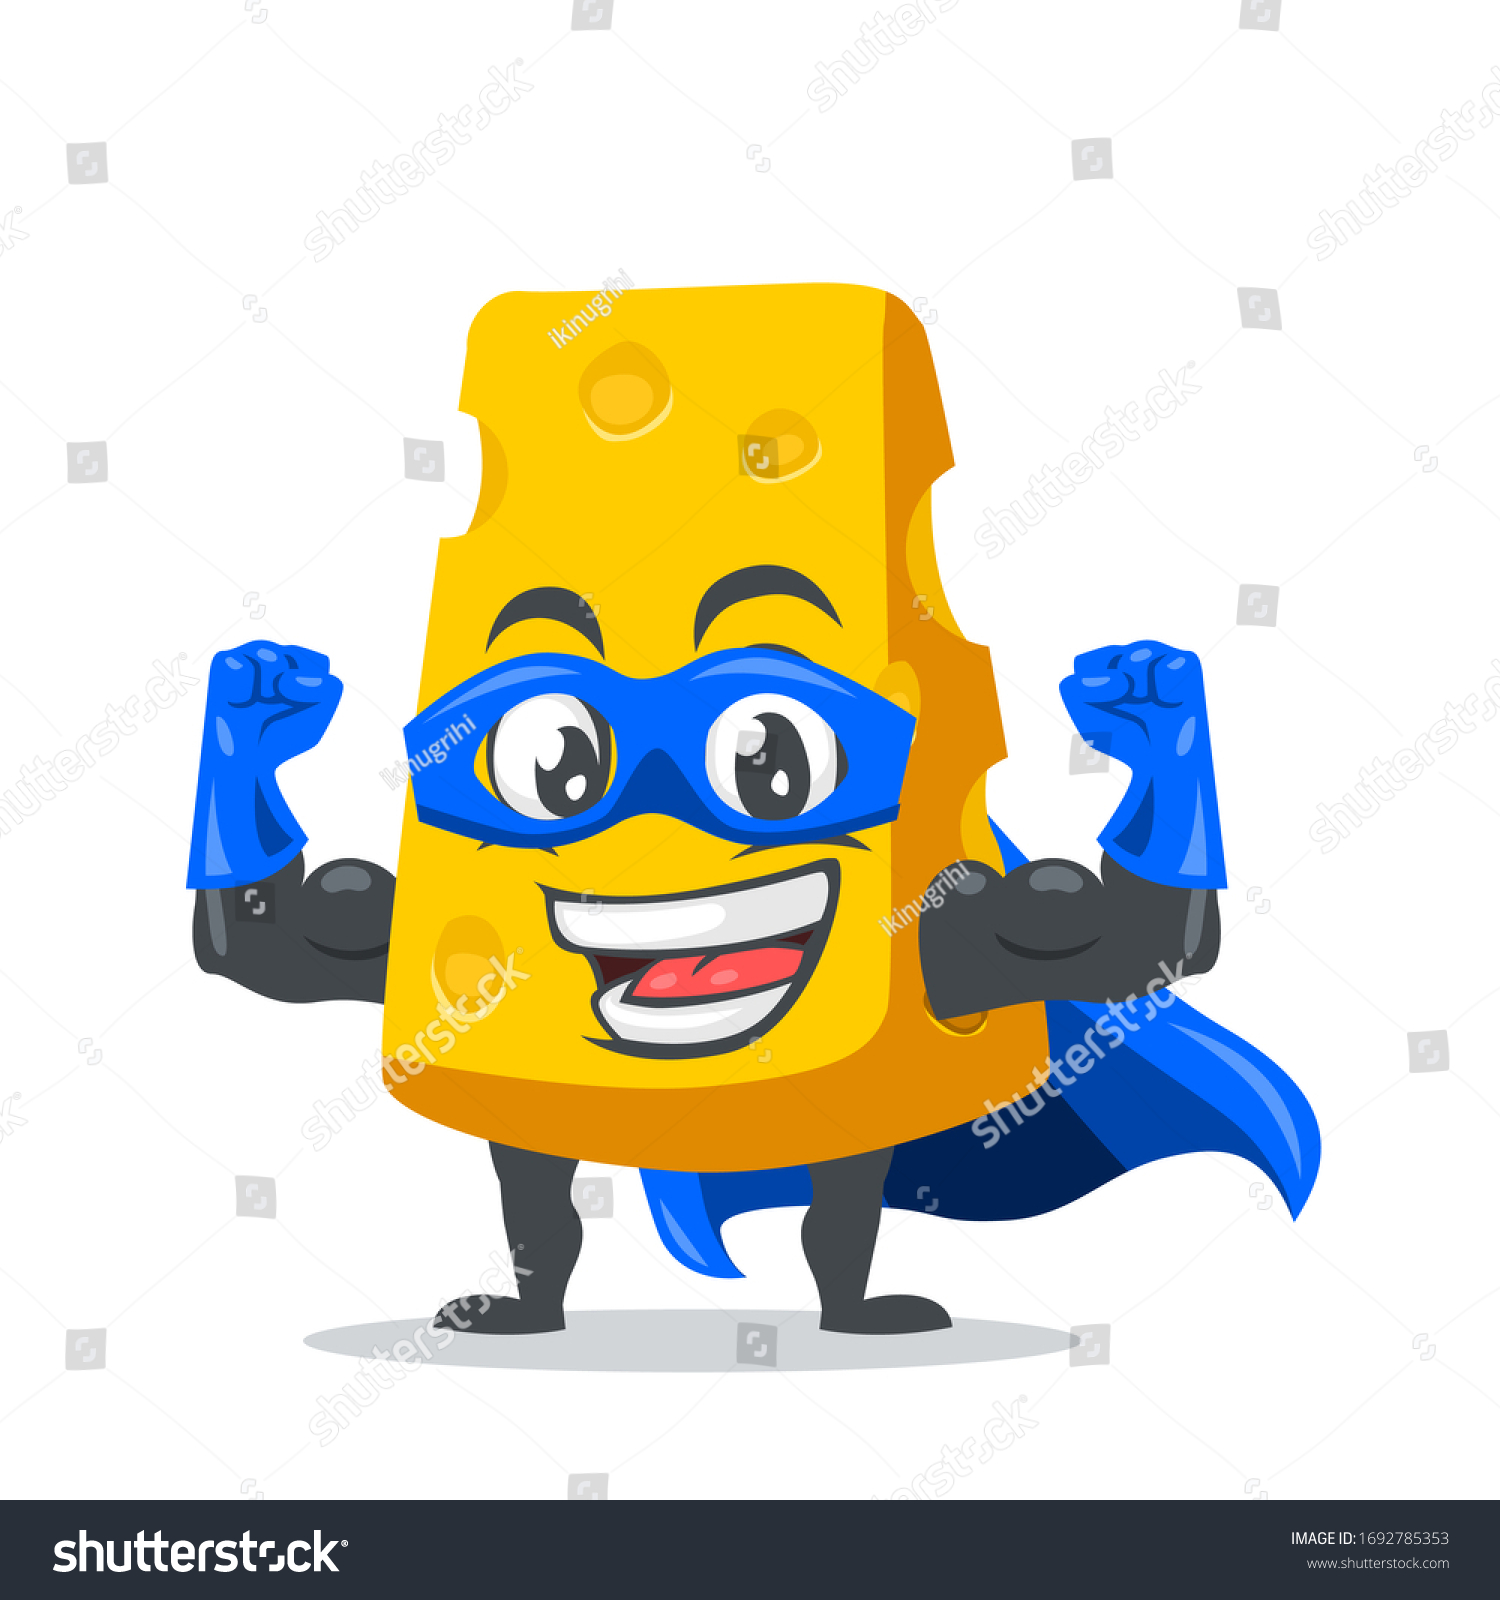 SVG of vector illustration of cheese character or mascot wearing super hero costume svg